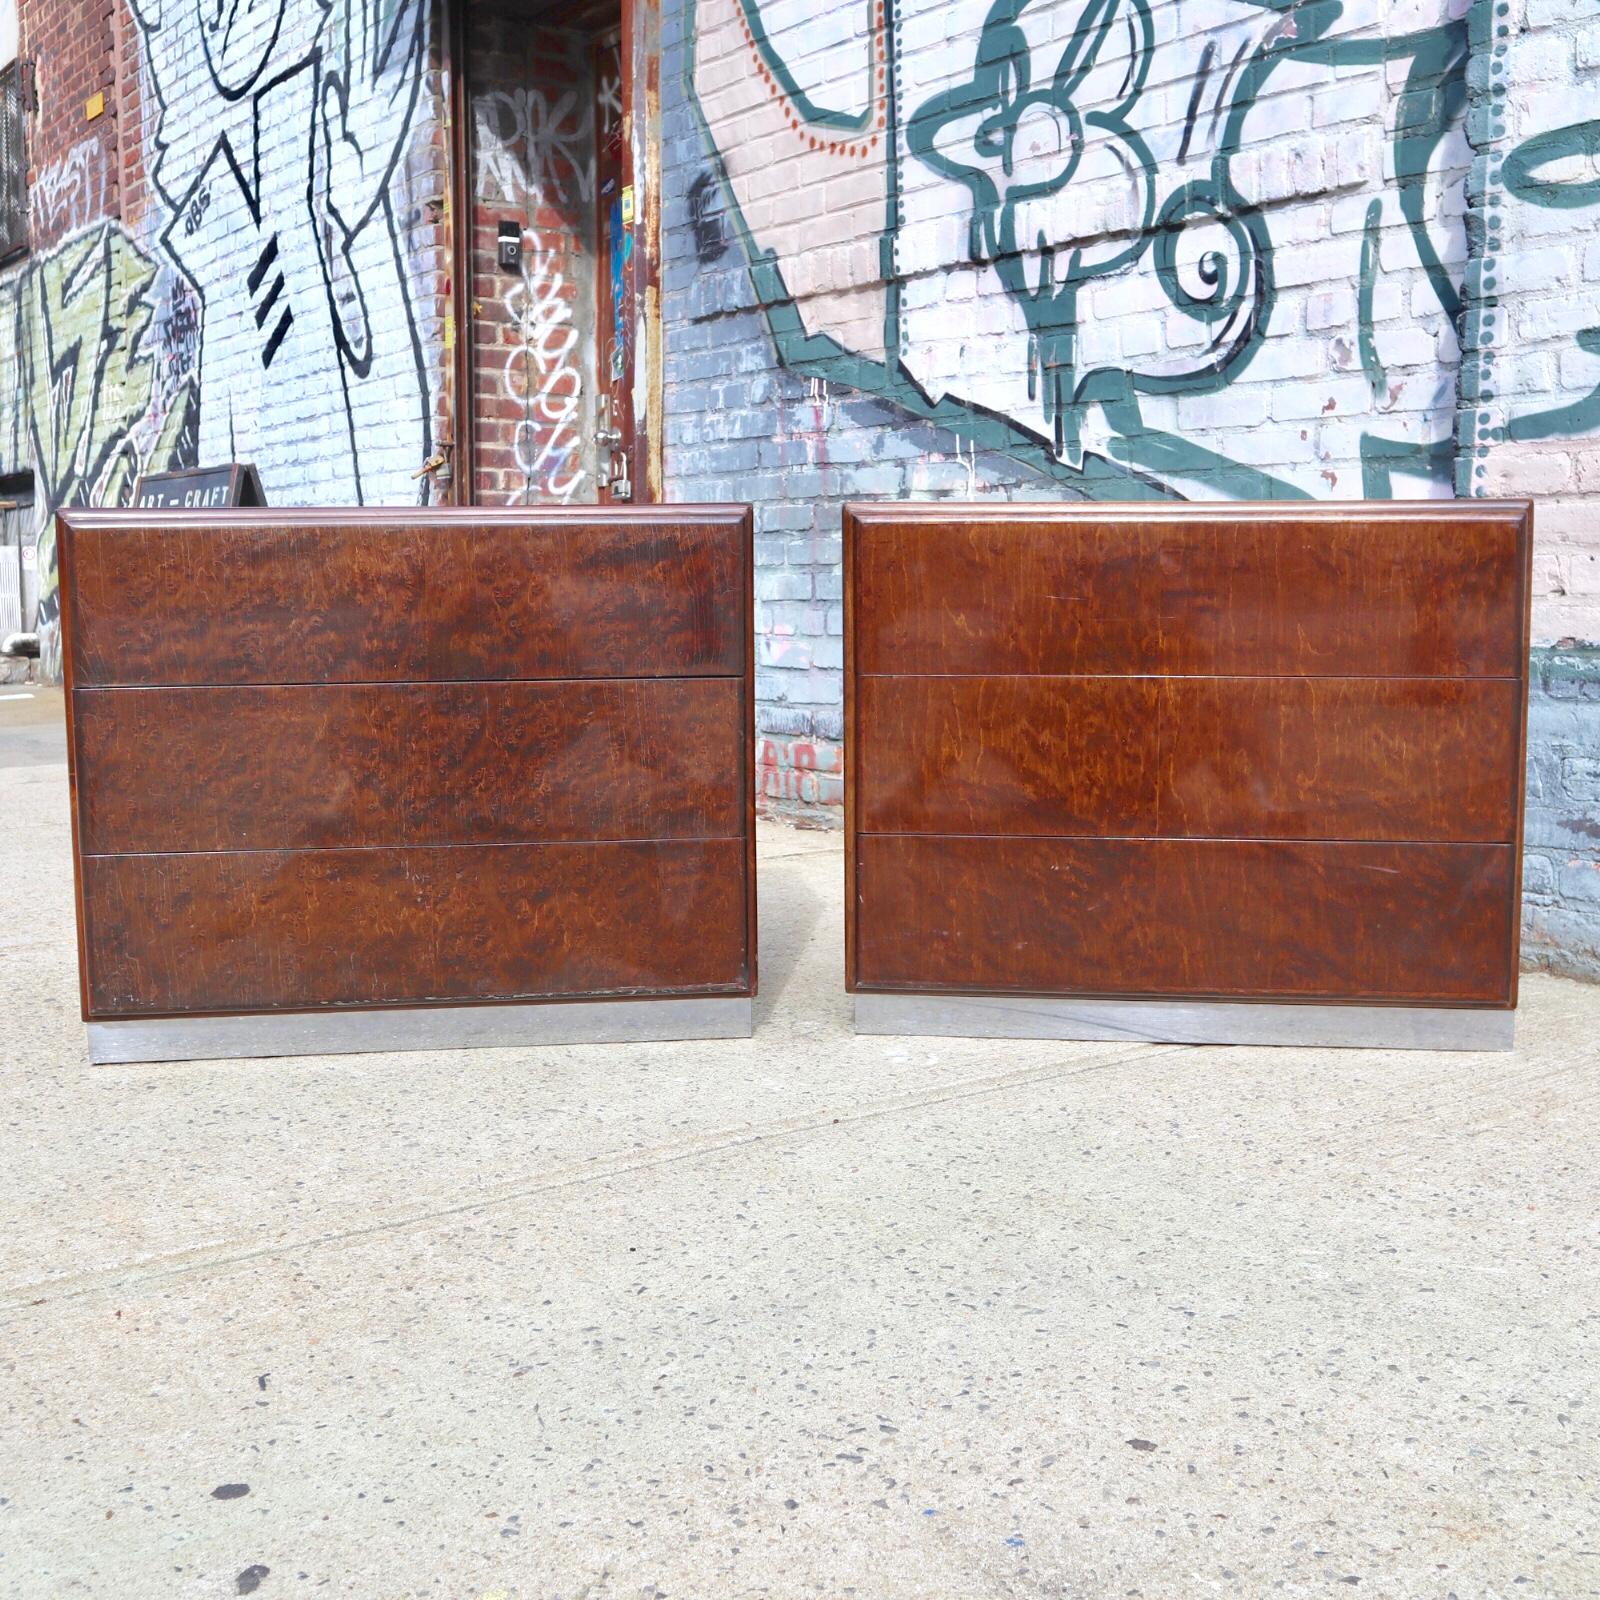 Swanky set of burl wood dressers by Milo Baughman for Thayer Coggin. Each dresser features 3 drawers that operate smoothly. Both signed with maker tag inside top drawer. Brilliant colored wood with highly figured grains. Dressers rest upon